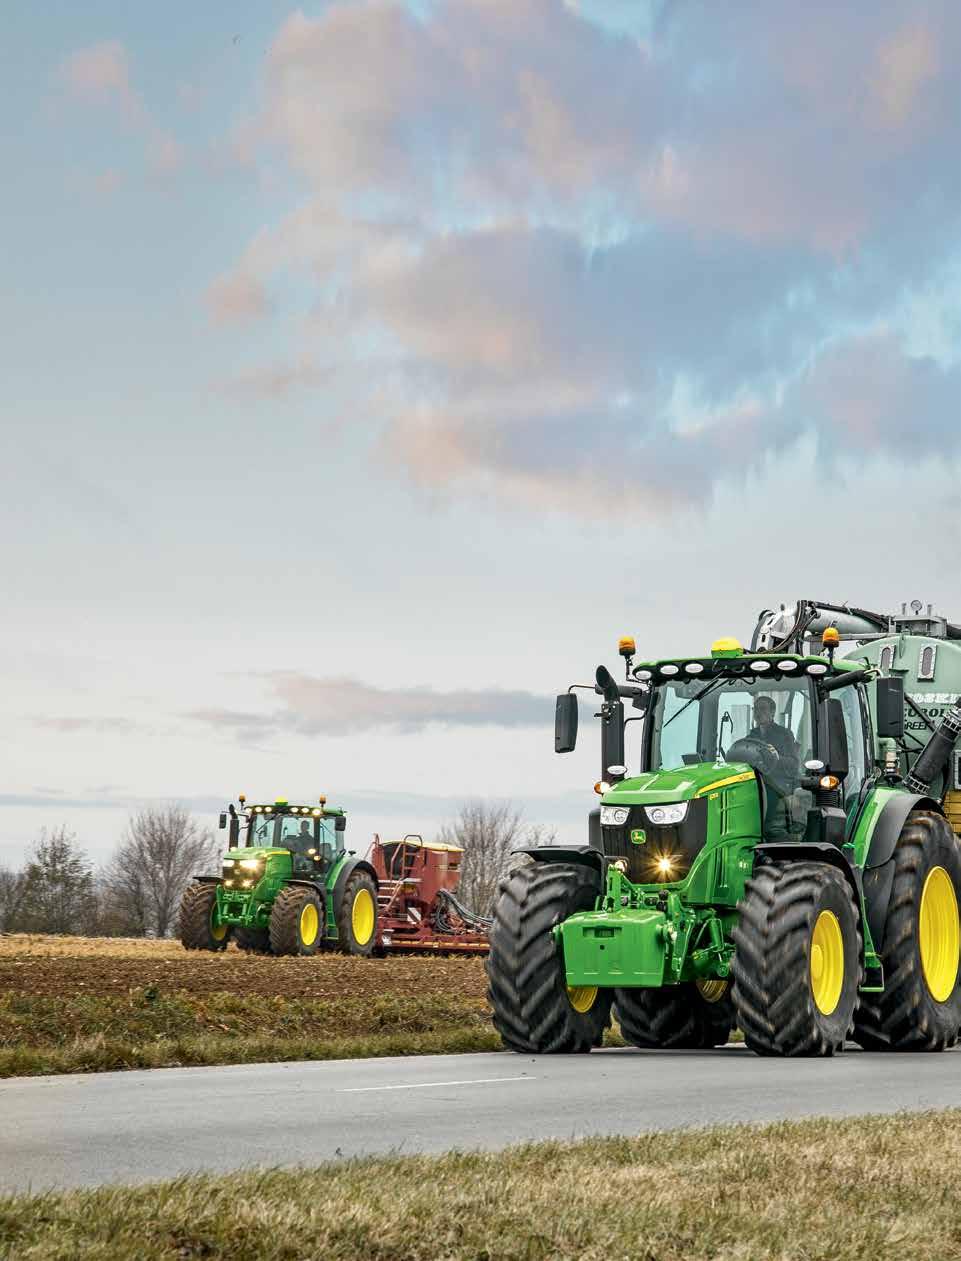 2 LIGHT. STRONG. SMART. At John Deere being good enough has never been good enough. A prime example of this philosophy is the extension of our 6R Series Tractor line-up.